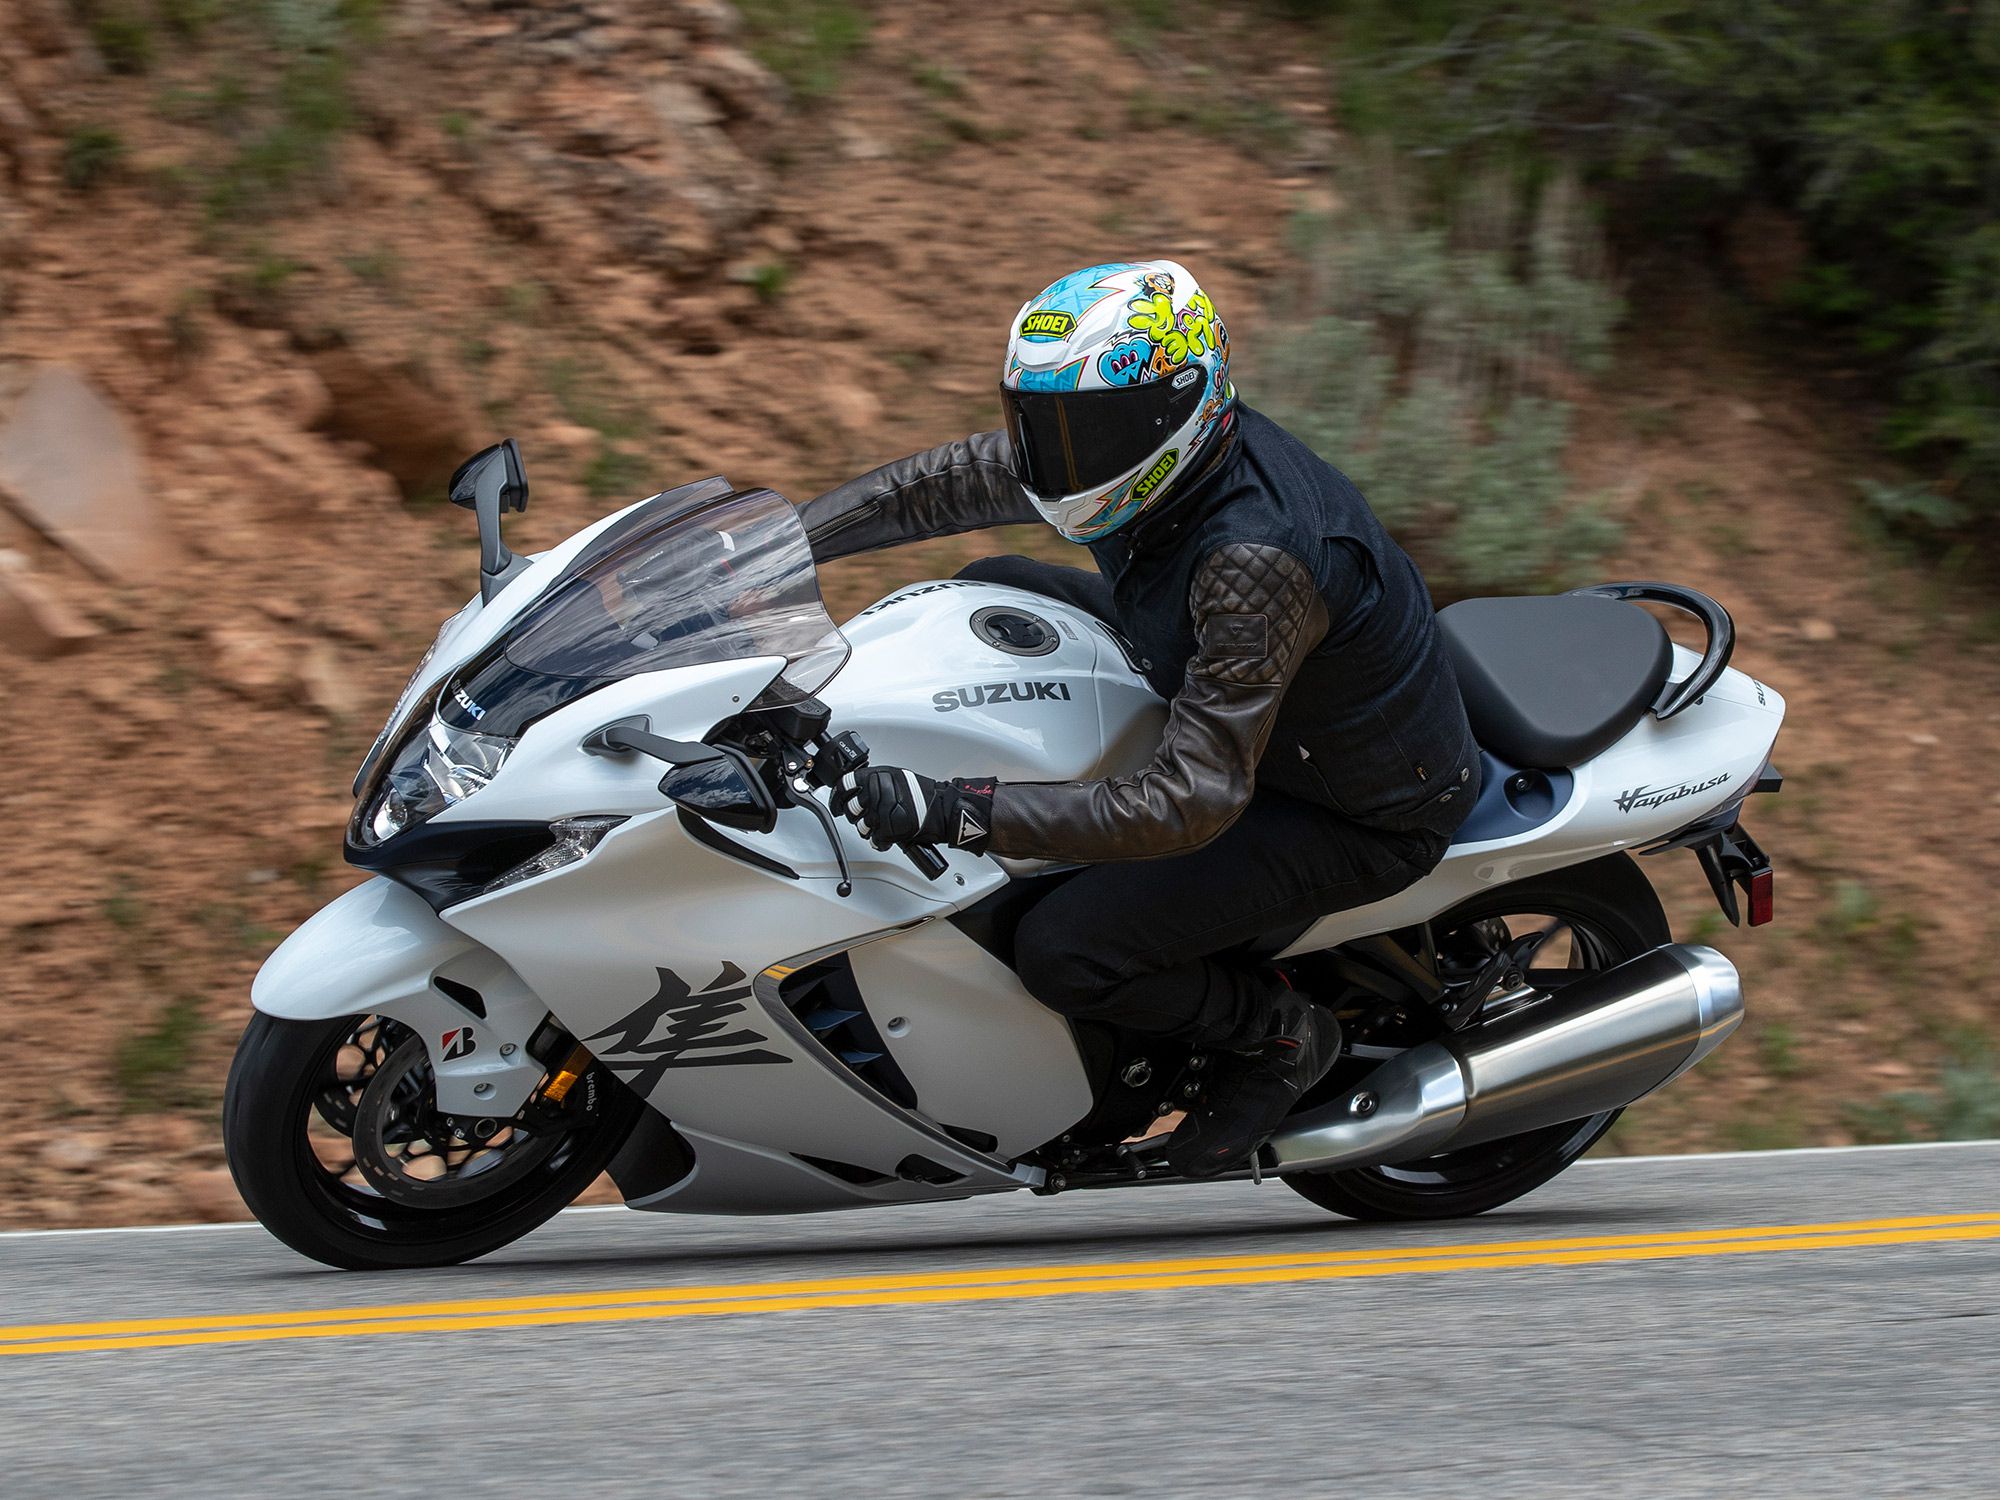 Suzuki joins the modern sportbike era with a suite of electronic rider aids. The electronics are easy to setup and allow the Hayabusa to go from mild to wild with a push of a button.